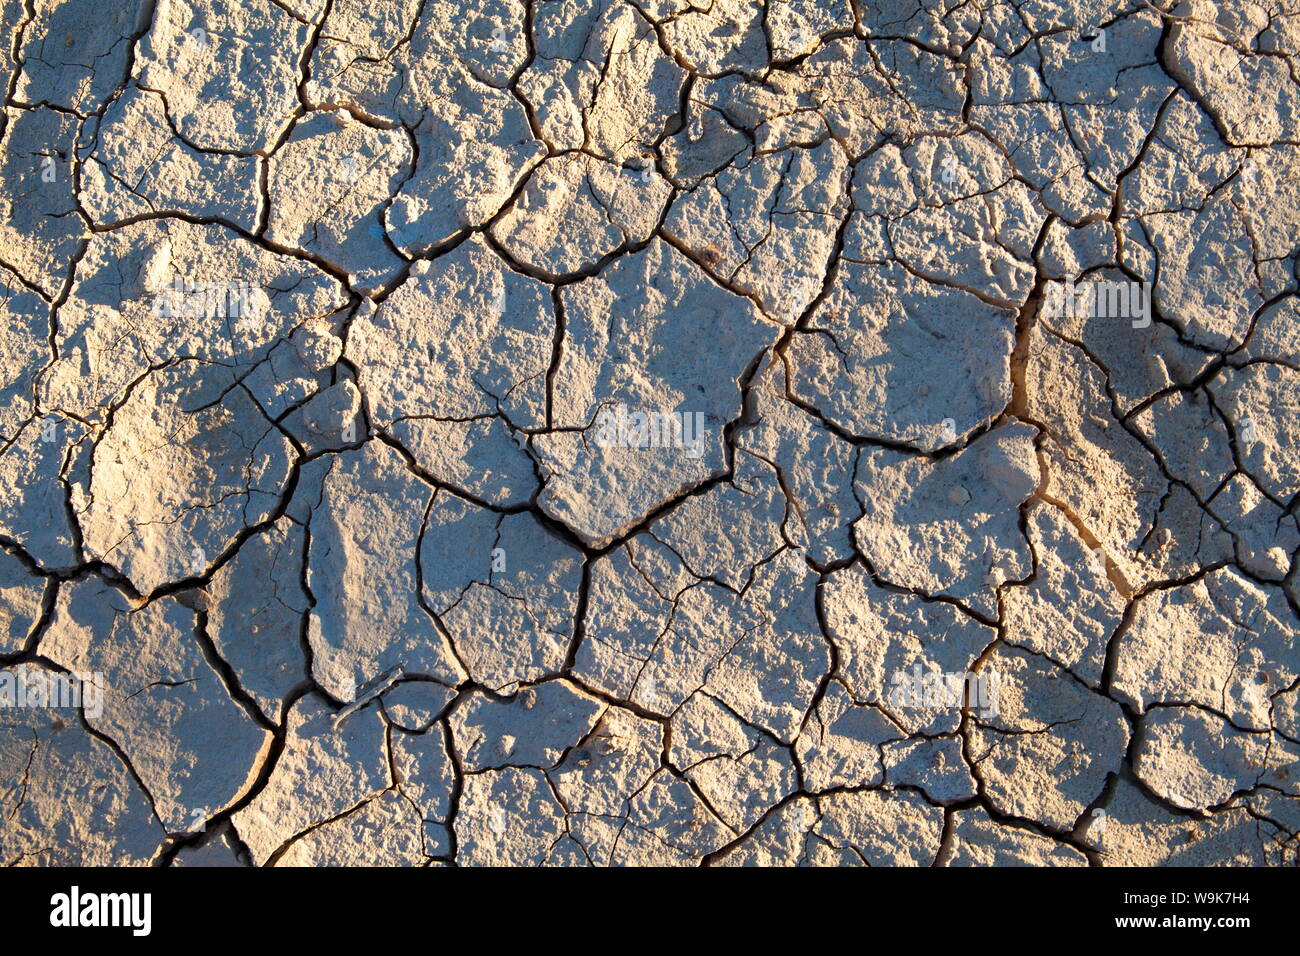 Dried mud/cracked earth at Sossusvlei in the ancient Namib Desert near Sesriem, Namib Naukluft Park, Namibia, Africa Stock Photo